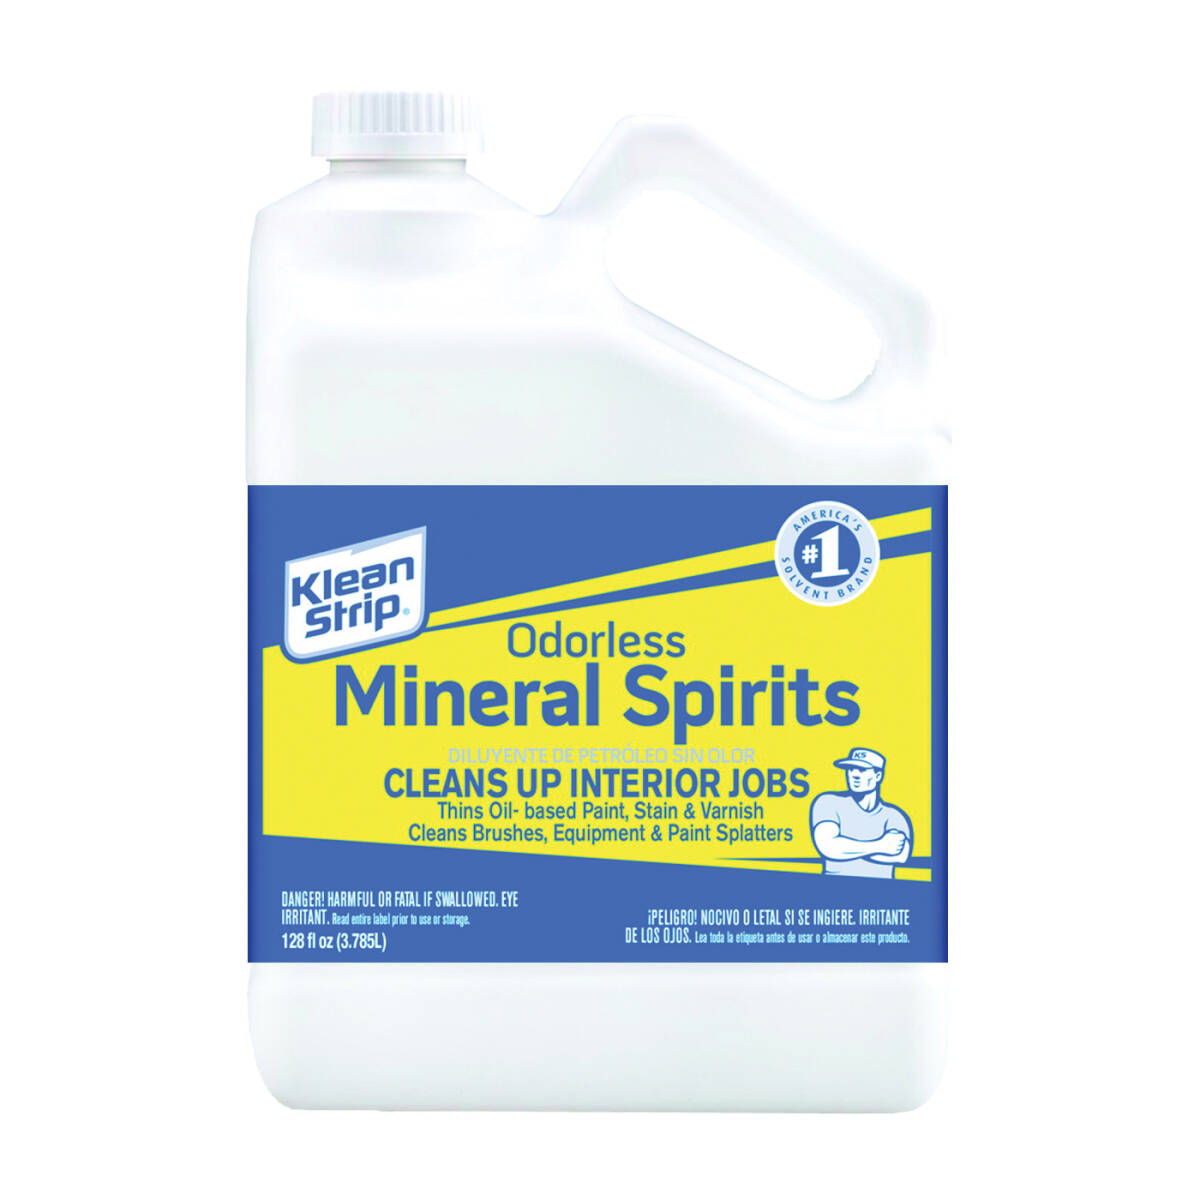 What Are Mineral Spirits Used For? - Mineral Spirits